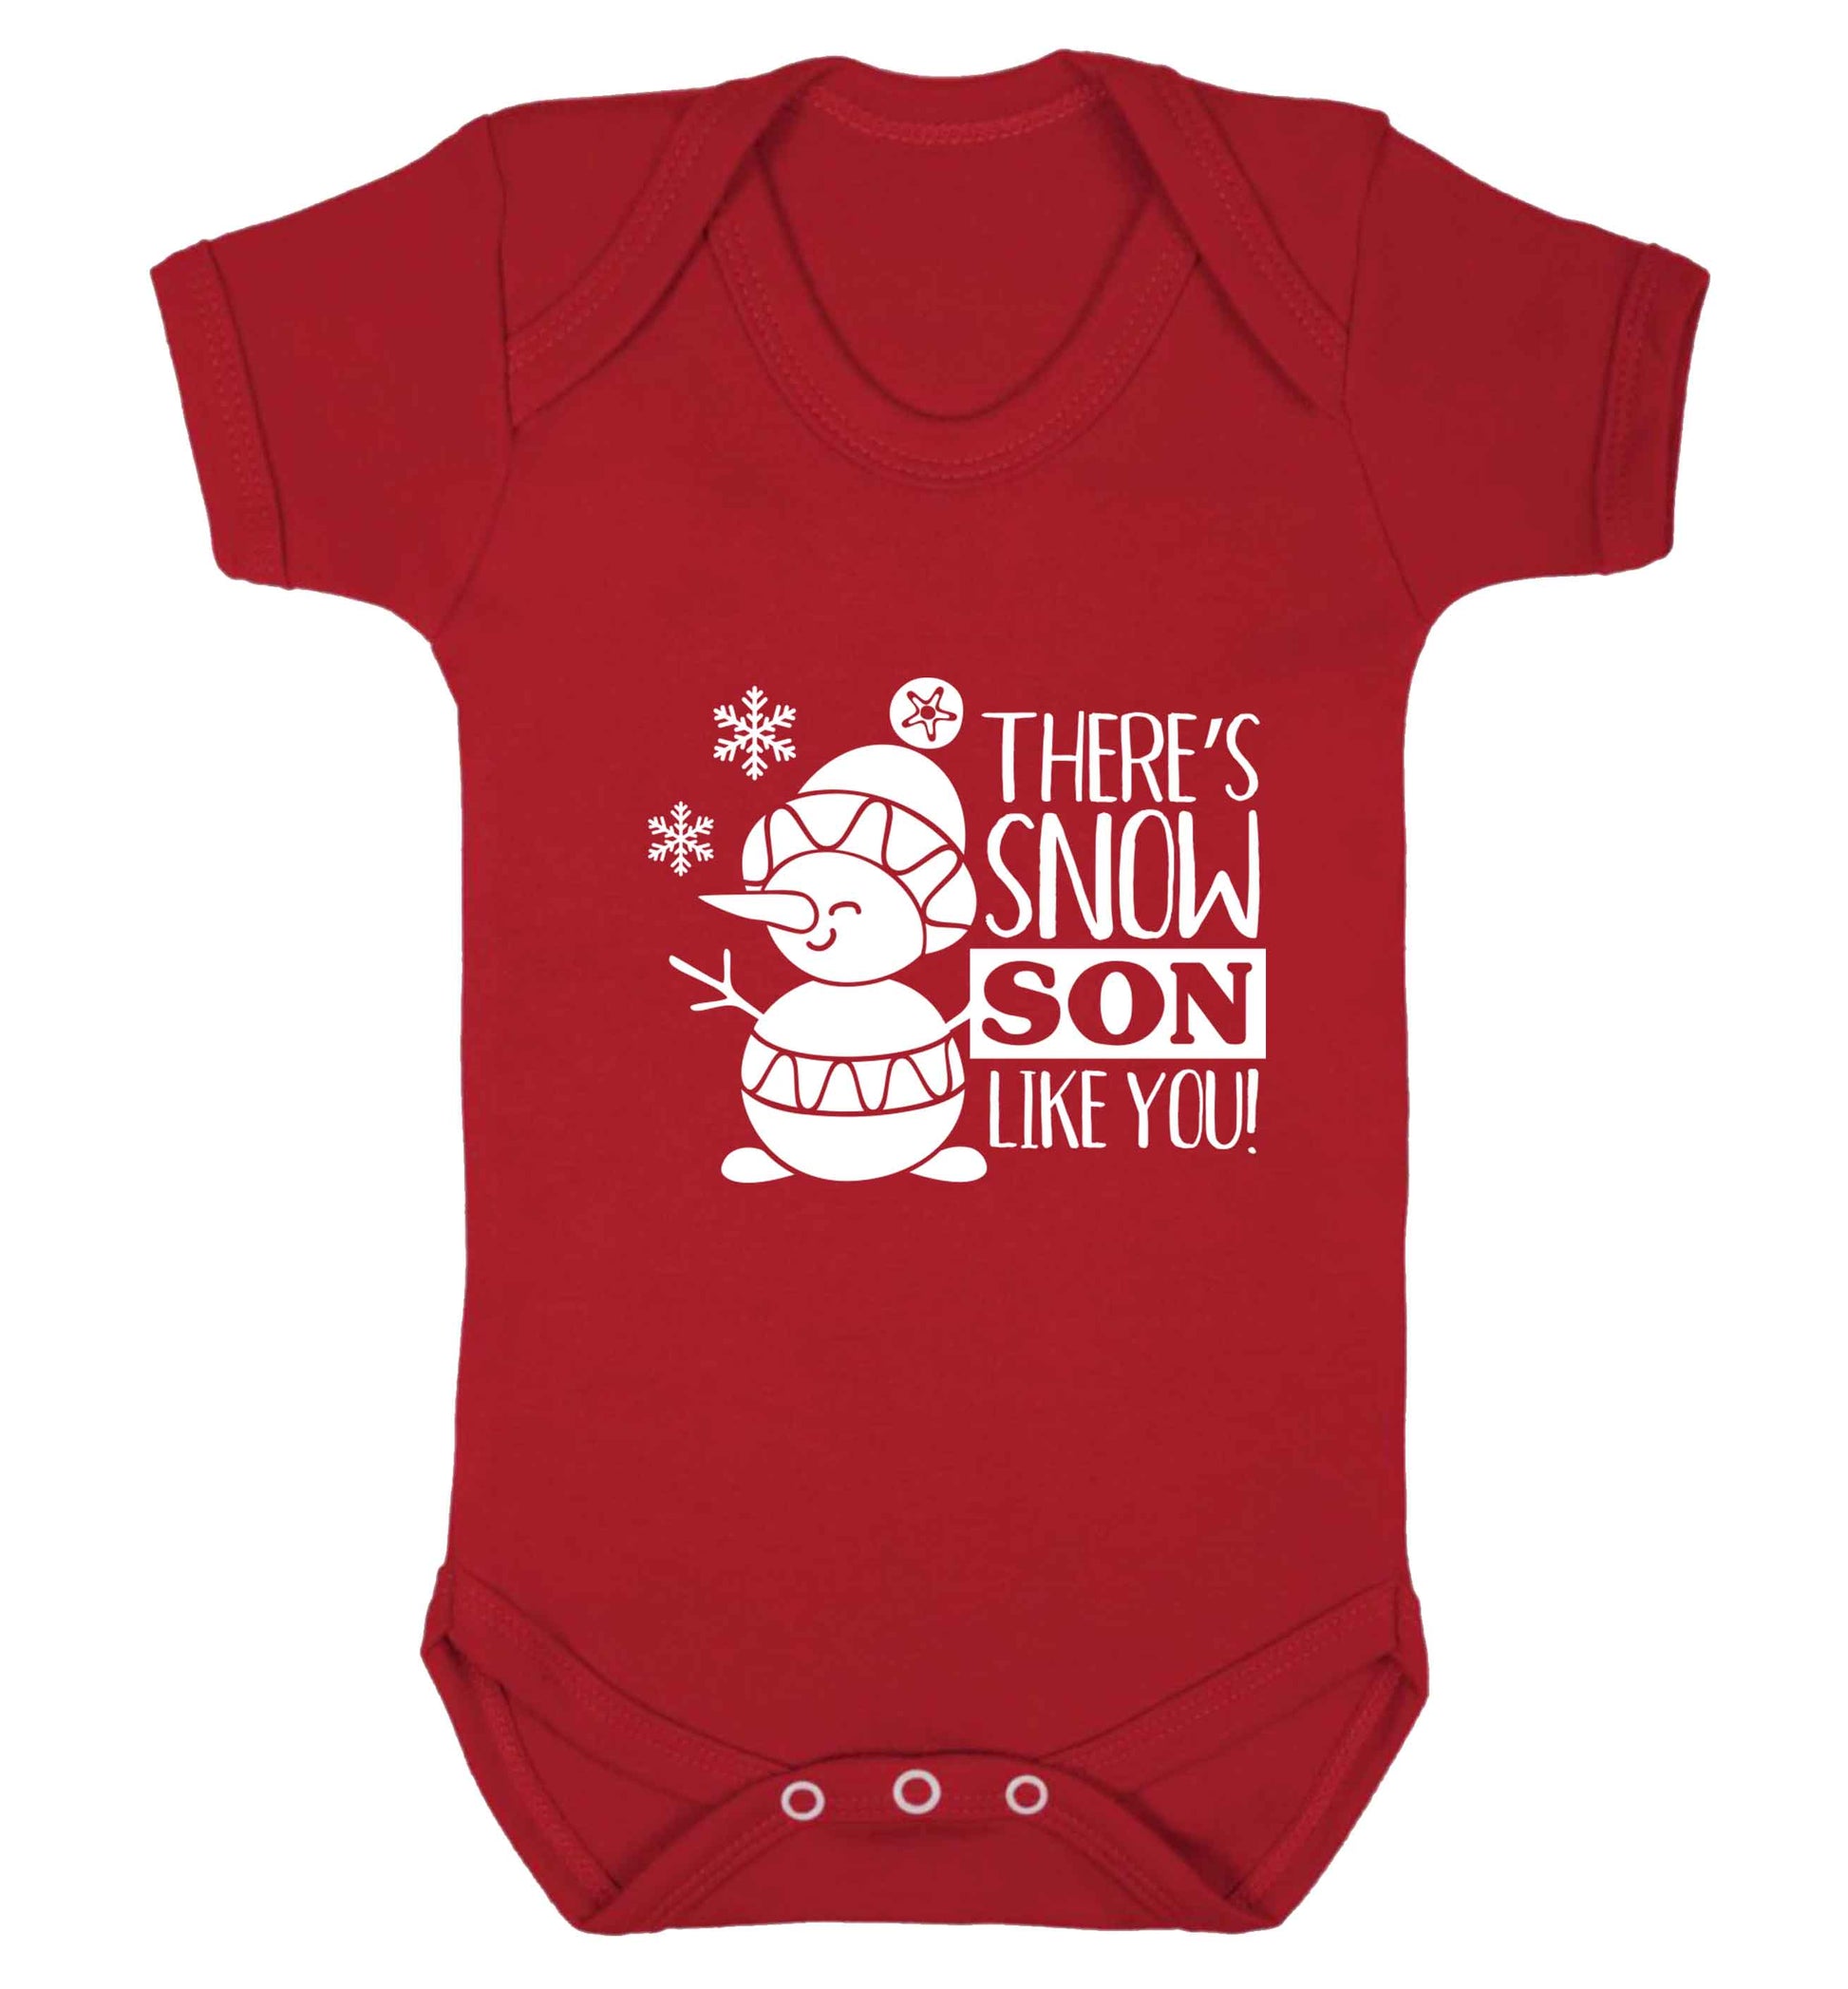 There's snow son like you baby vest red 18-24 months